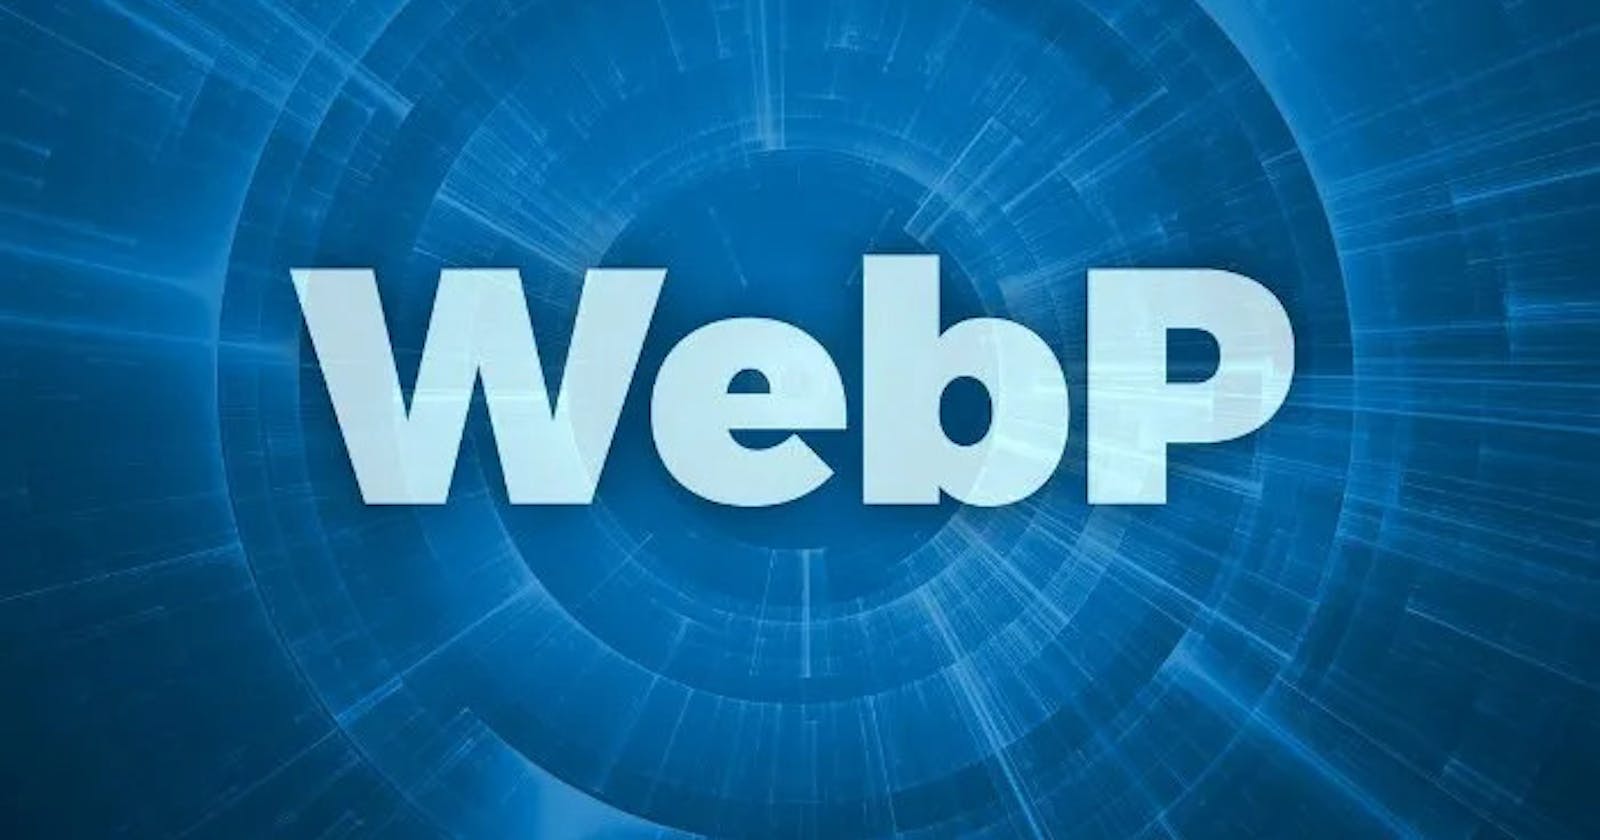 The New Competitive Image Format For Web 👉 WebP